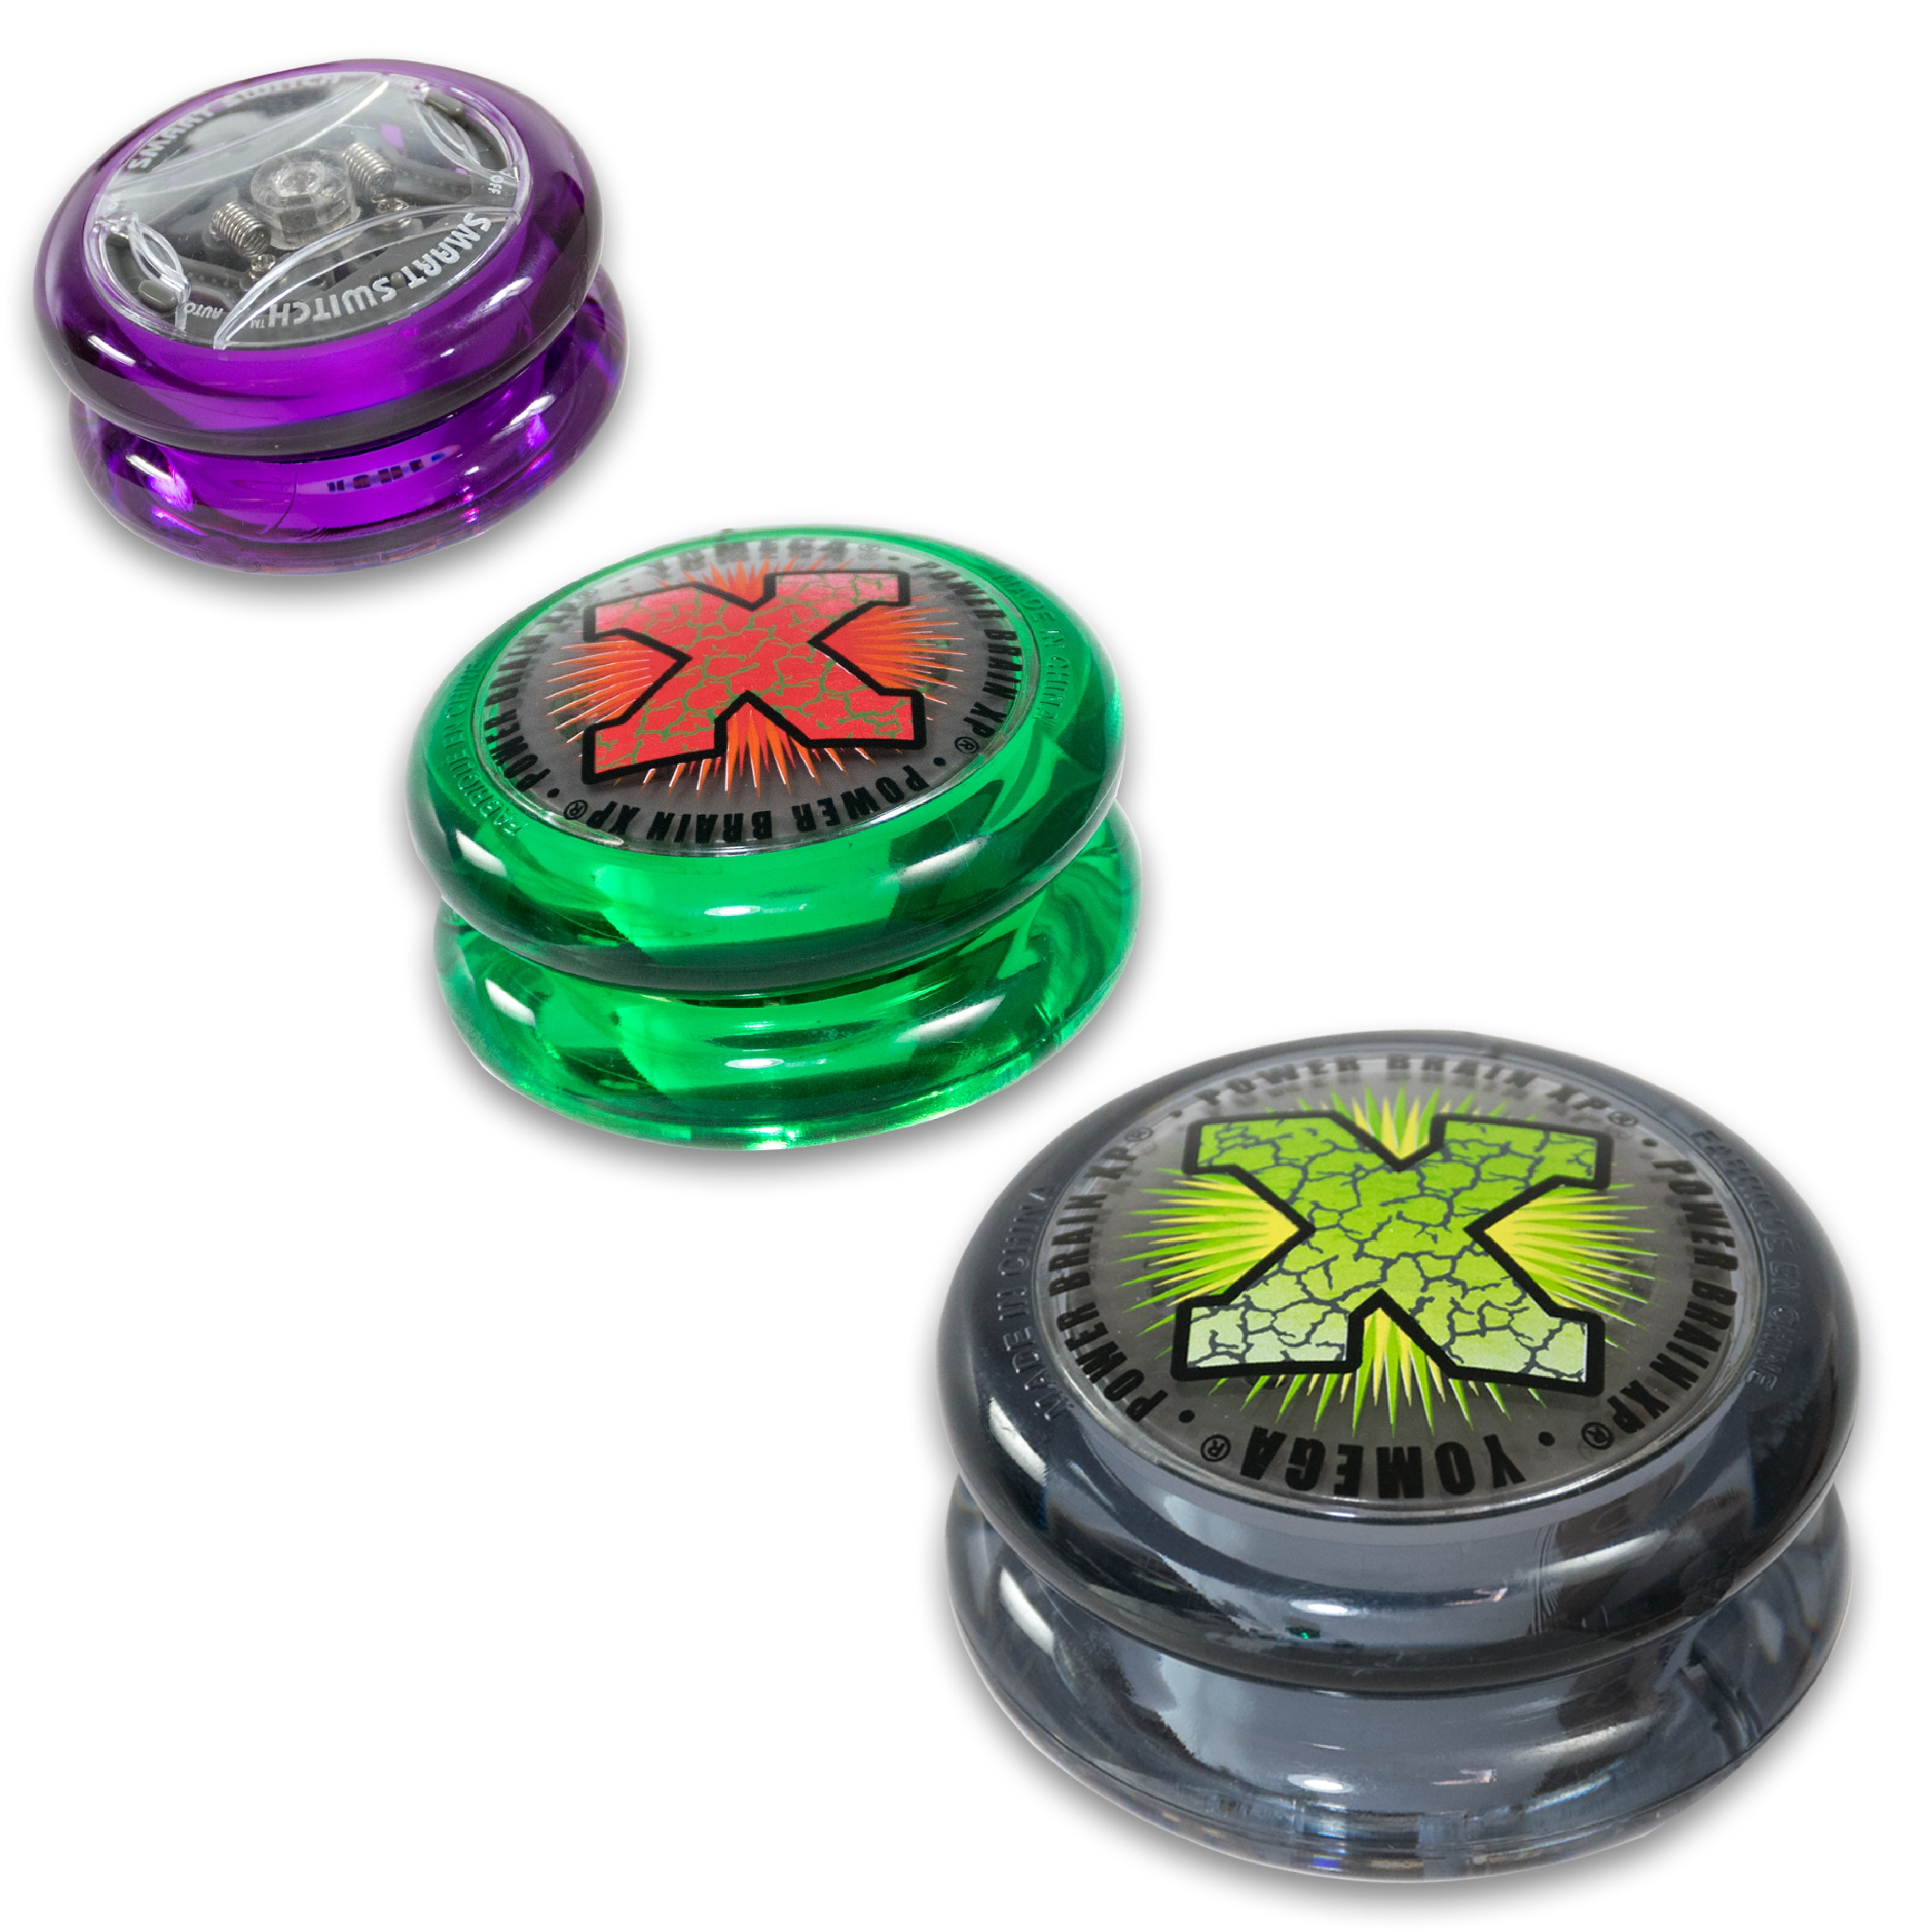 Yomega Power Brain XP yoyo - Includes Synchronized Clutch and a Smart  Switch which enables Players to Choose Between auto-Return and Manual  Styles of 